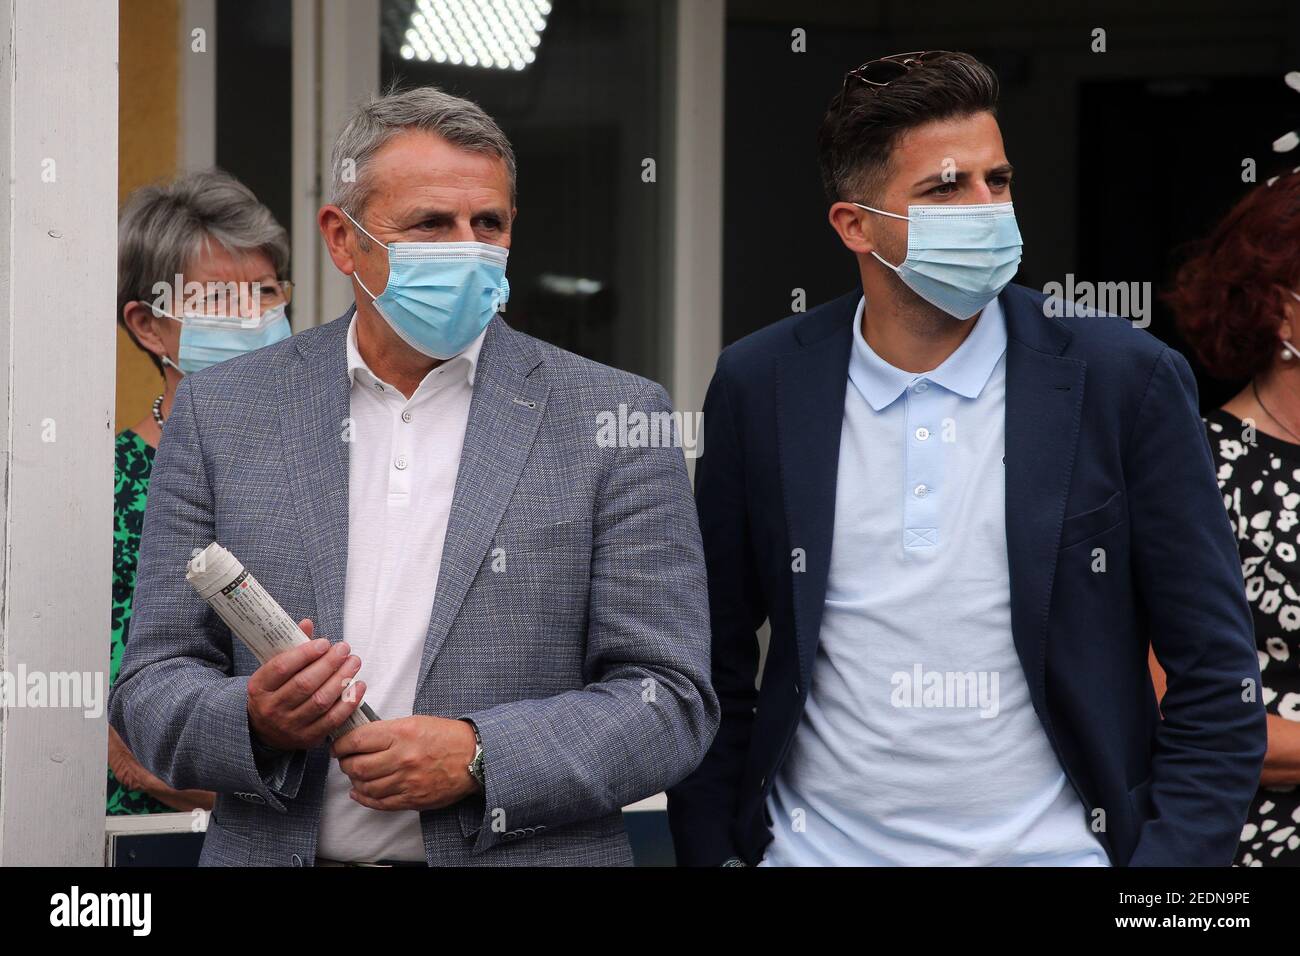 05.09.2020, Iffezheim, Baden-Wuerttemberg, Germany - Klaus Allofs (left) and son Niklas with mouth-nose protection in portrait.. 00S200905D351CAROEX.J Stock Photo